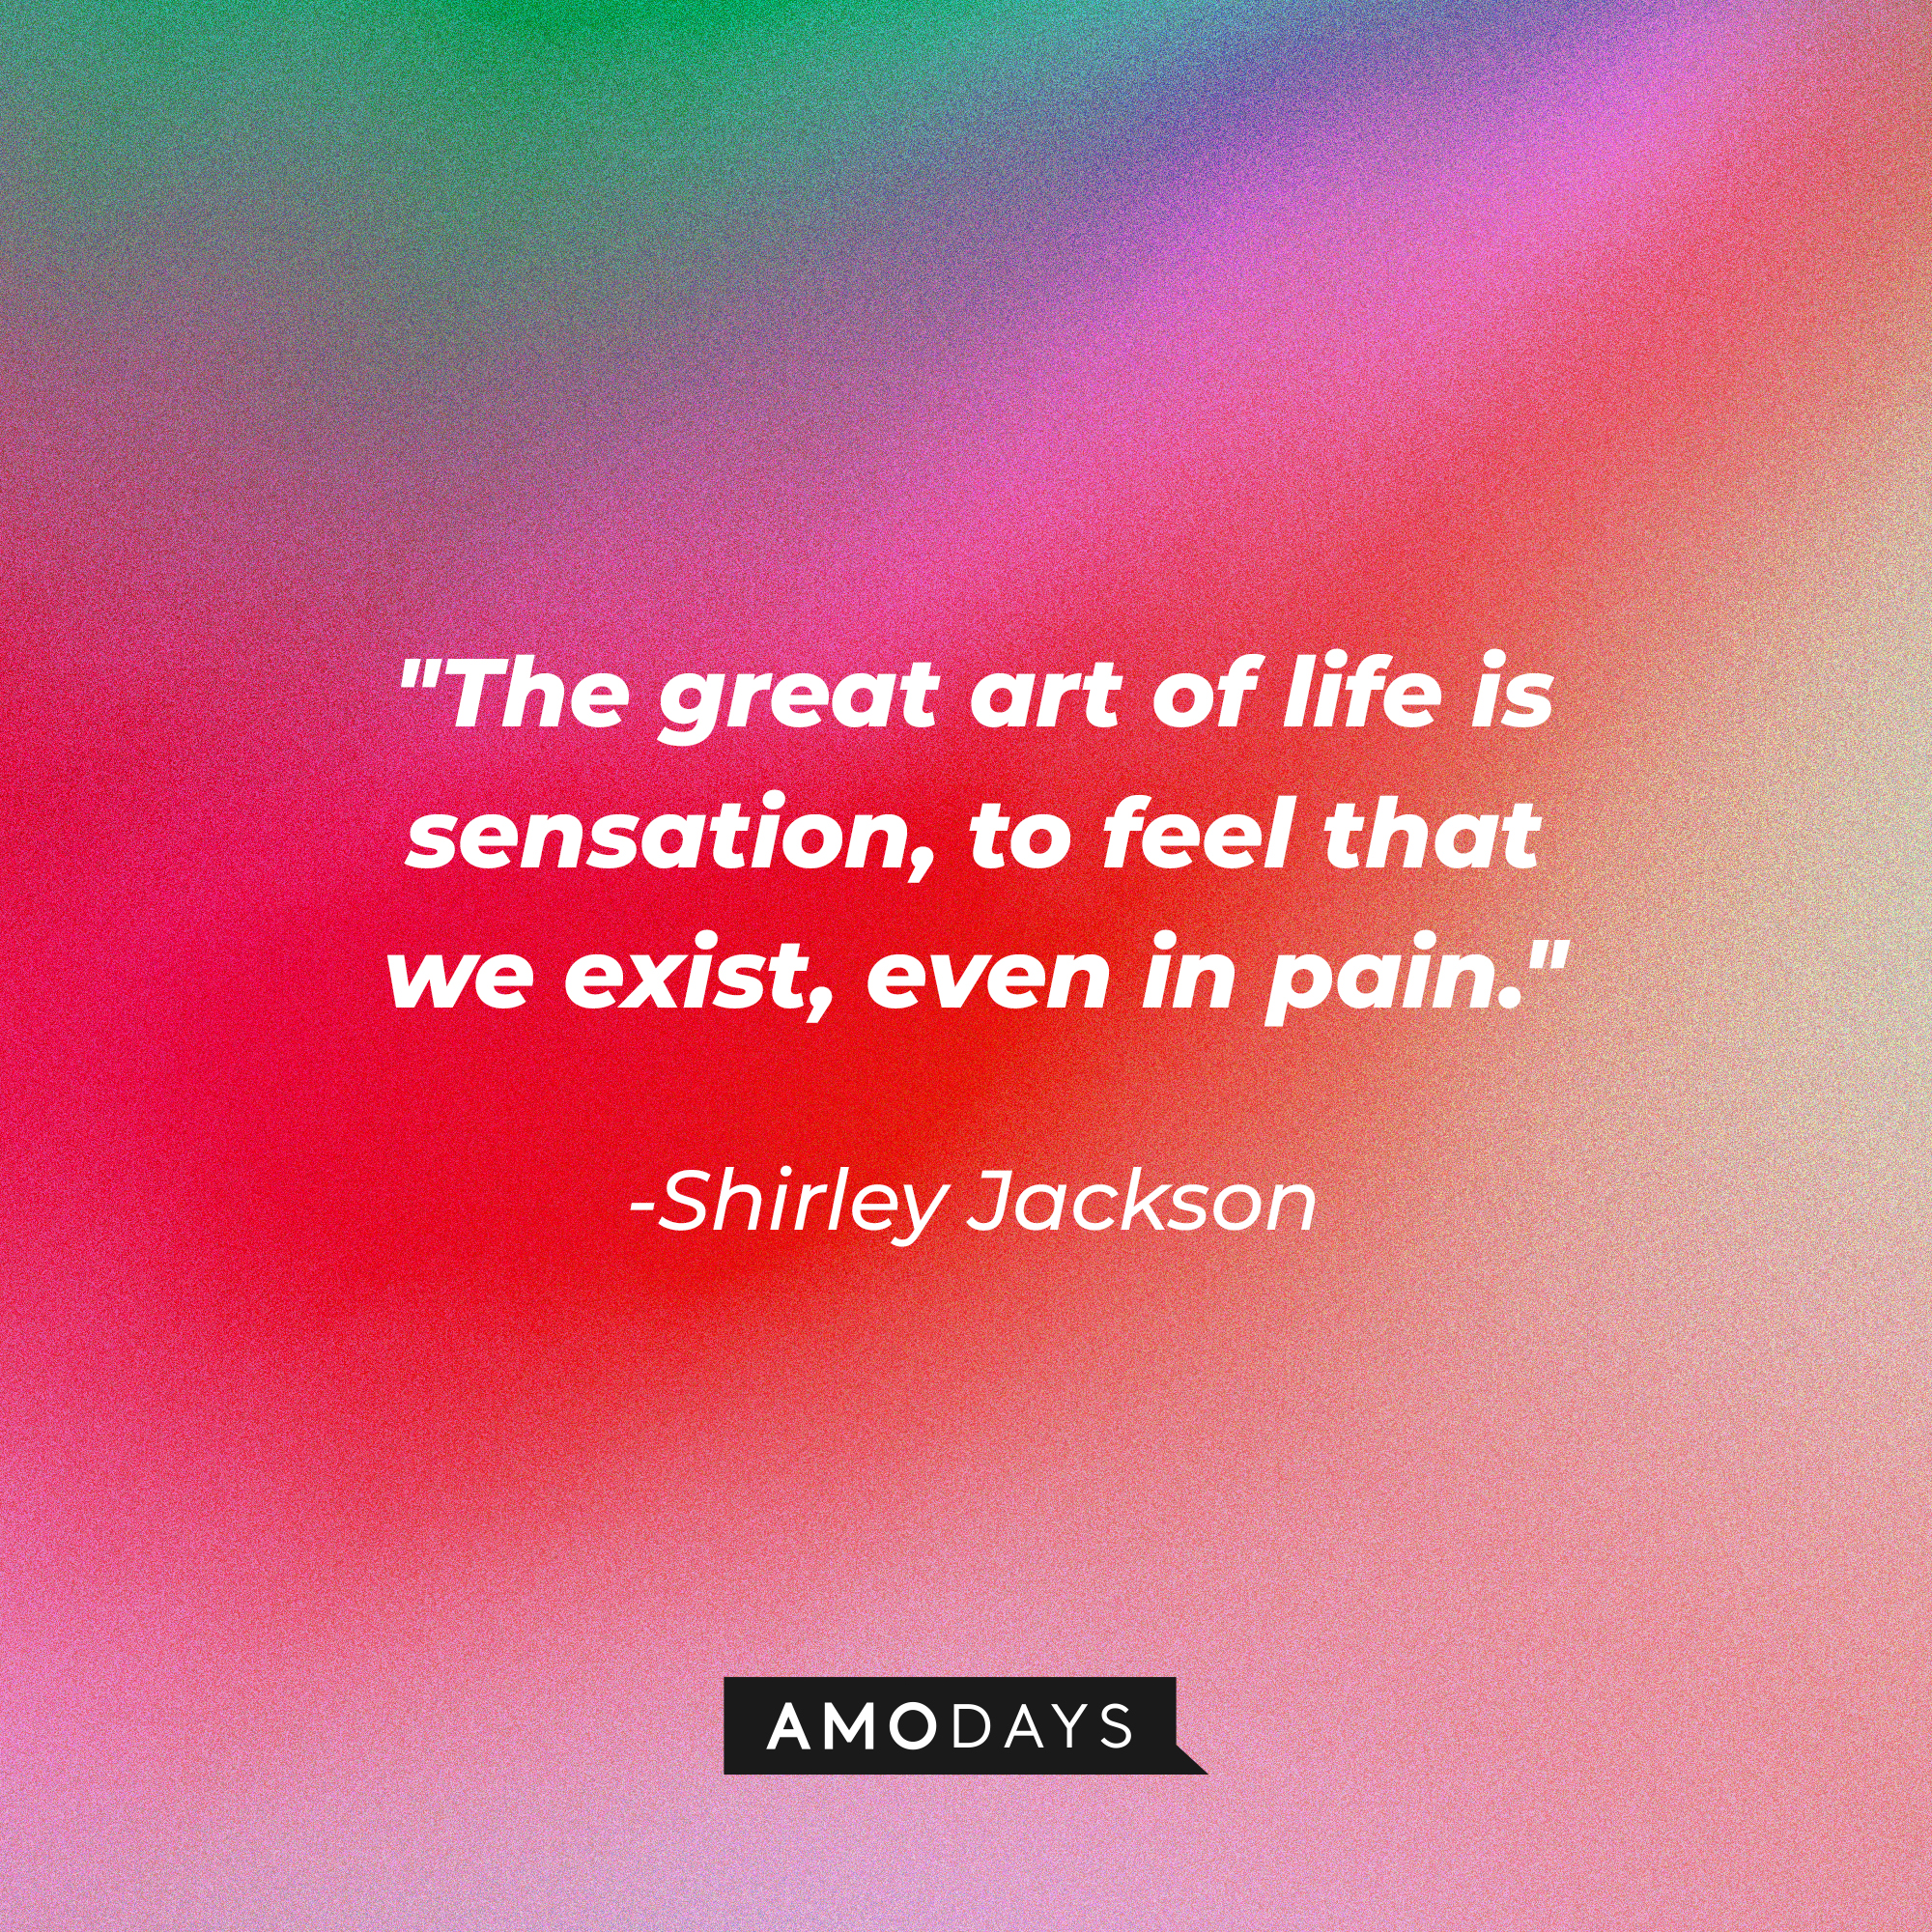 Shirley Jackson's quote: "The great art of life is sensation, to feel that we exist, even in pain." | Source: AmoDays